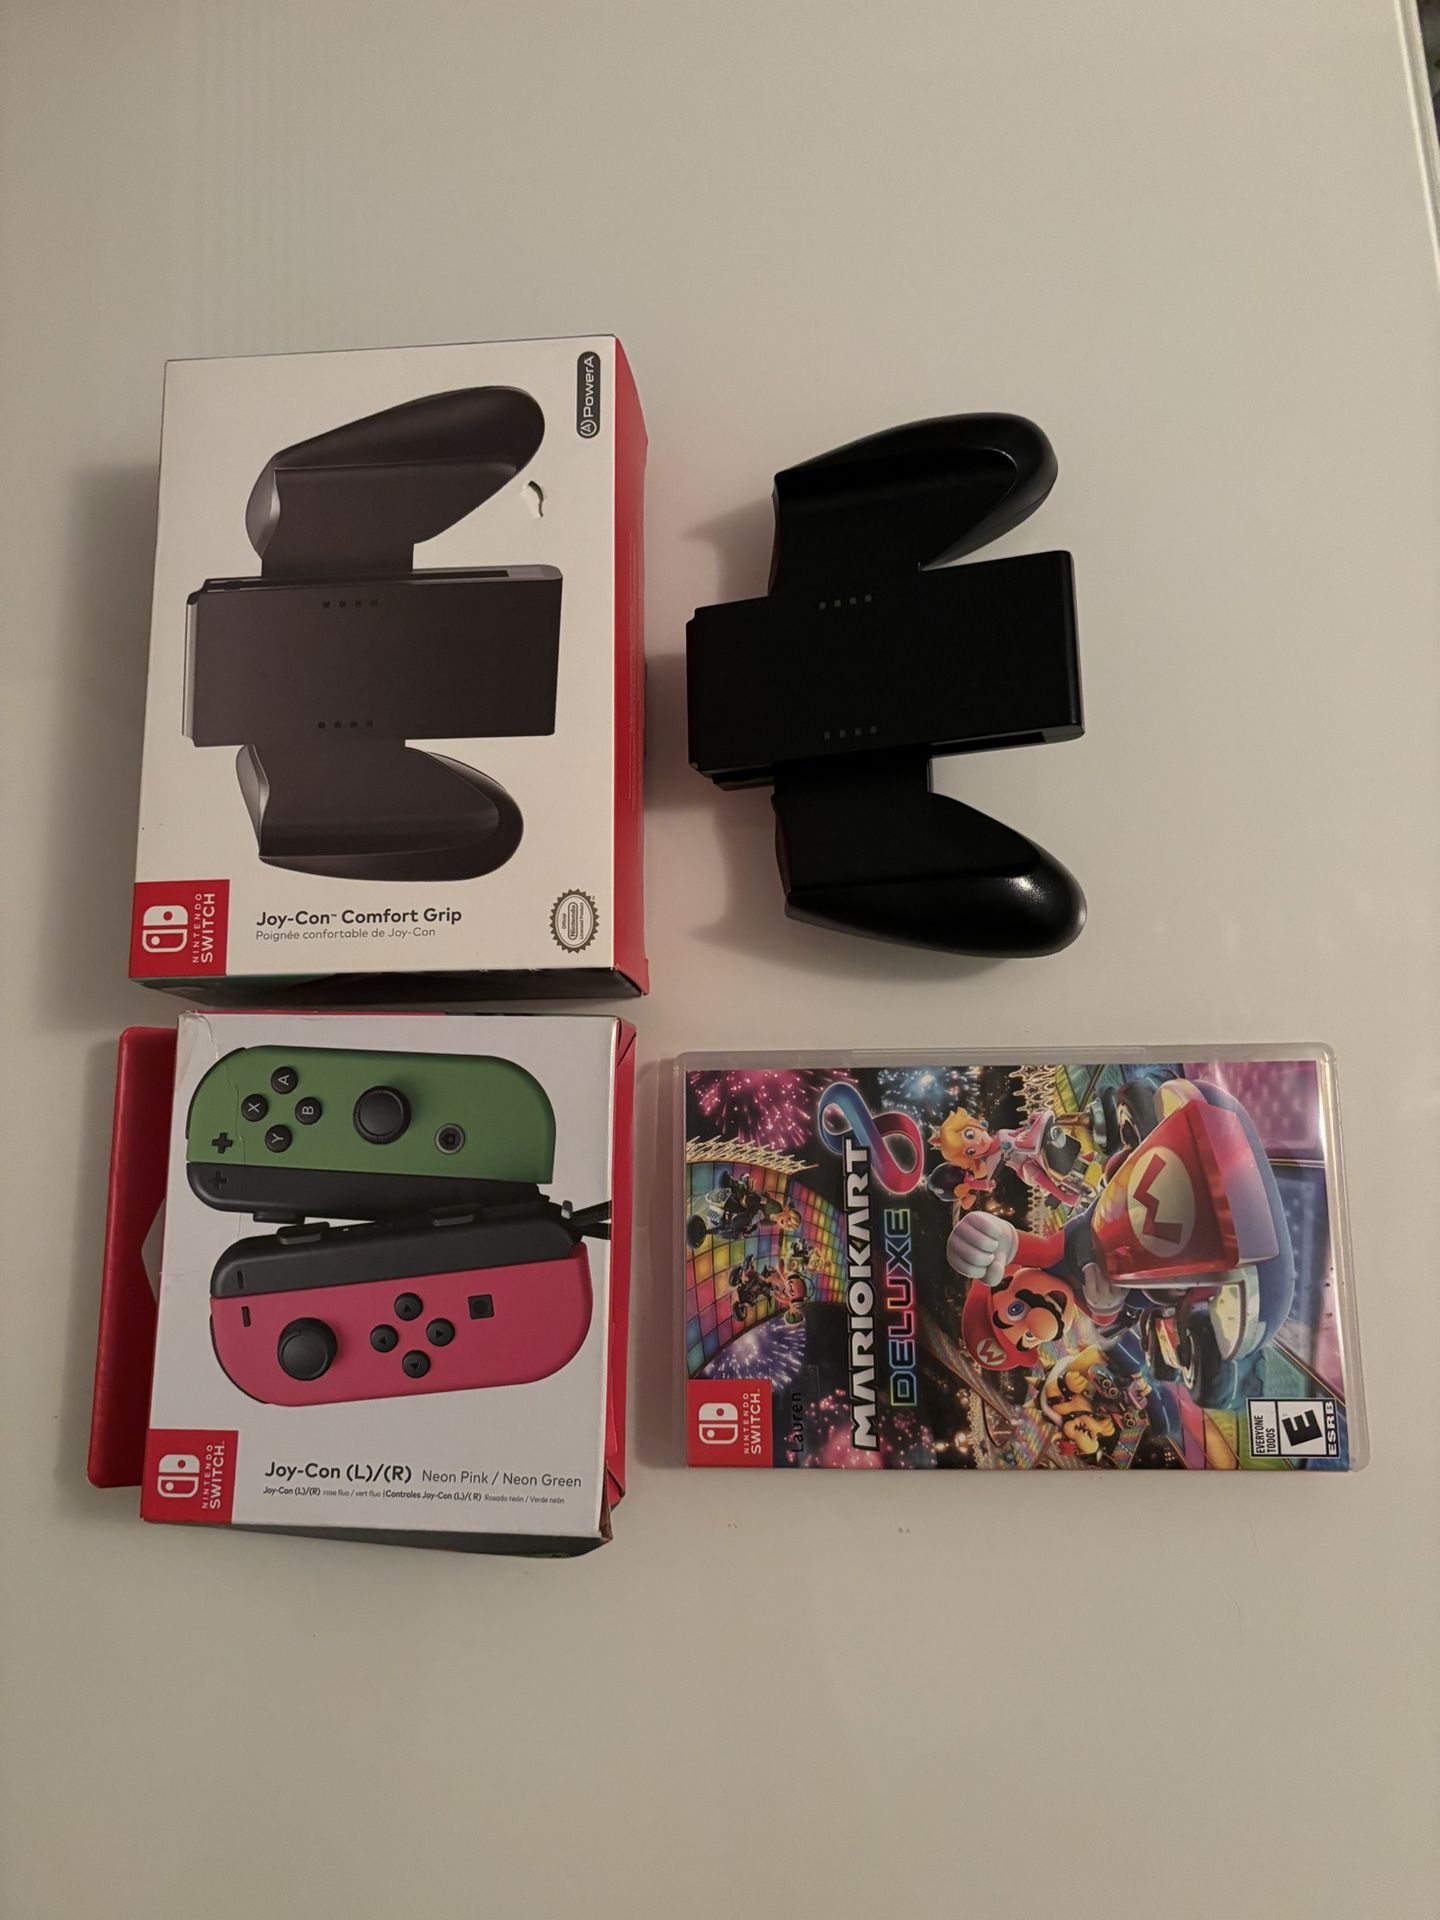 Nintendo switch controller pack with two comfort controller grips. Comes with Mario cart deluxe.